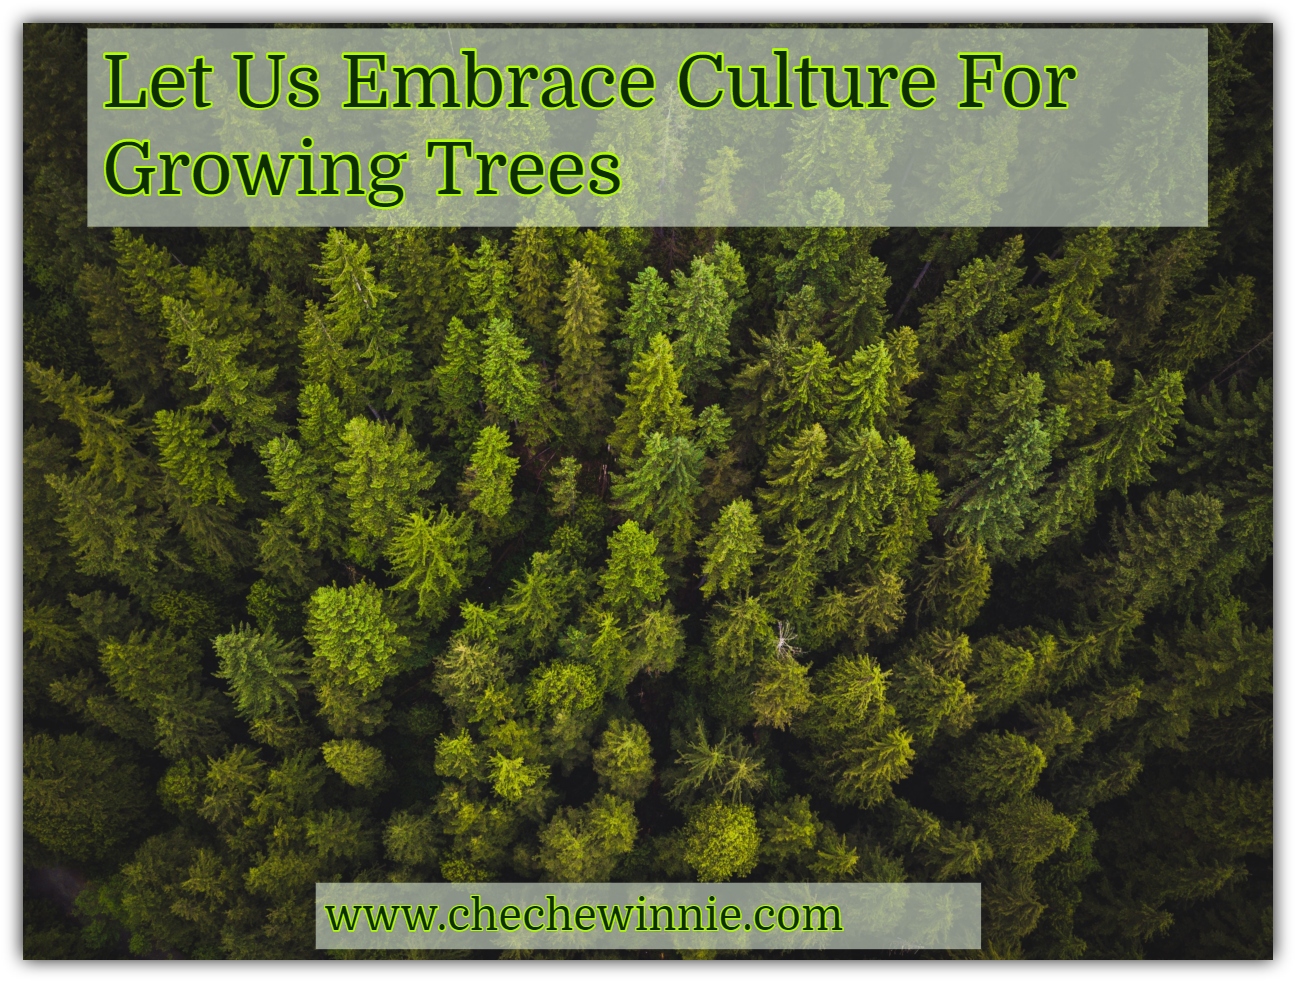 Let Us Embrace Culture For Growing Trees